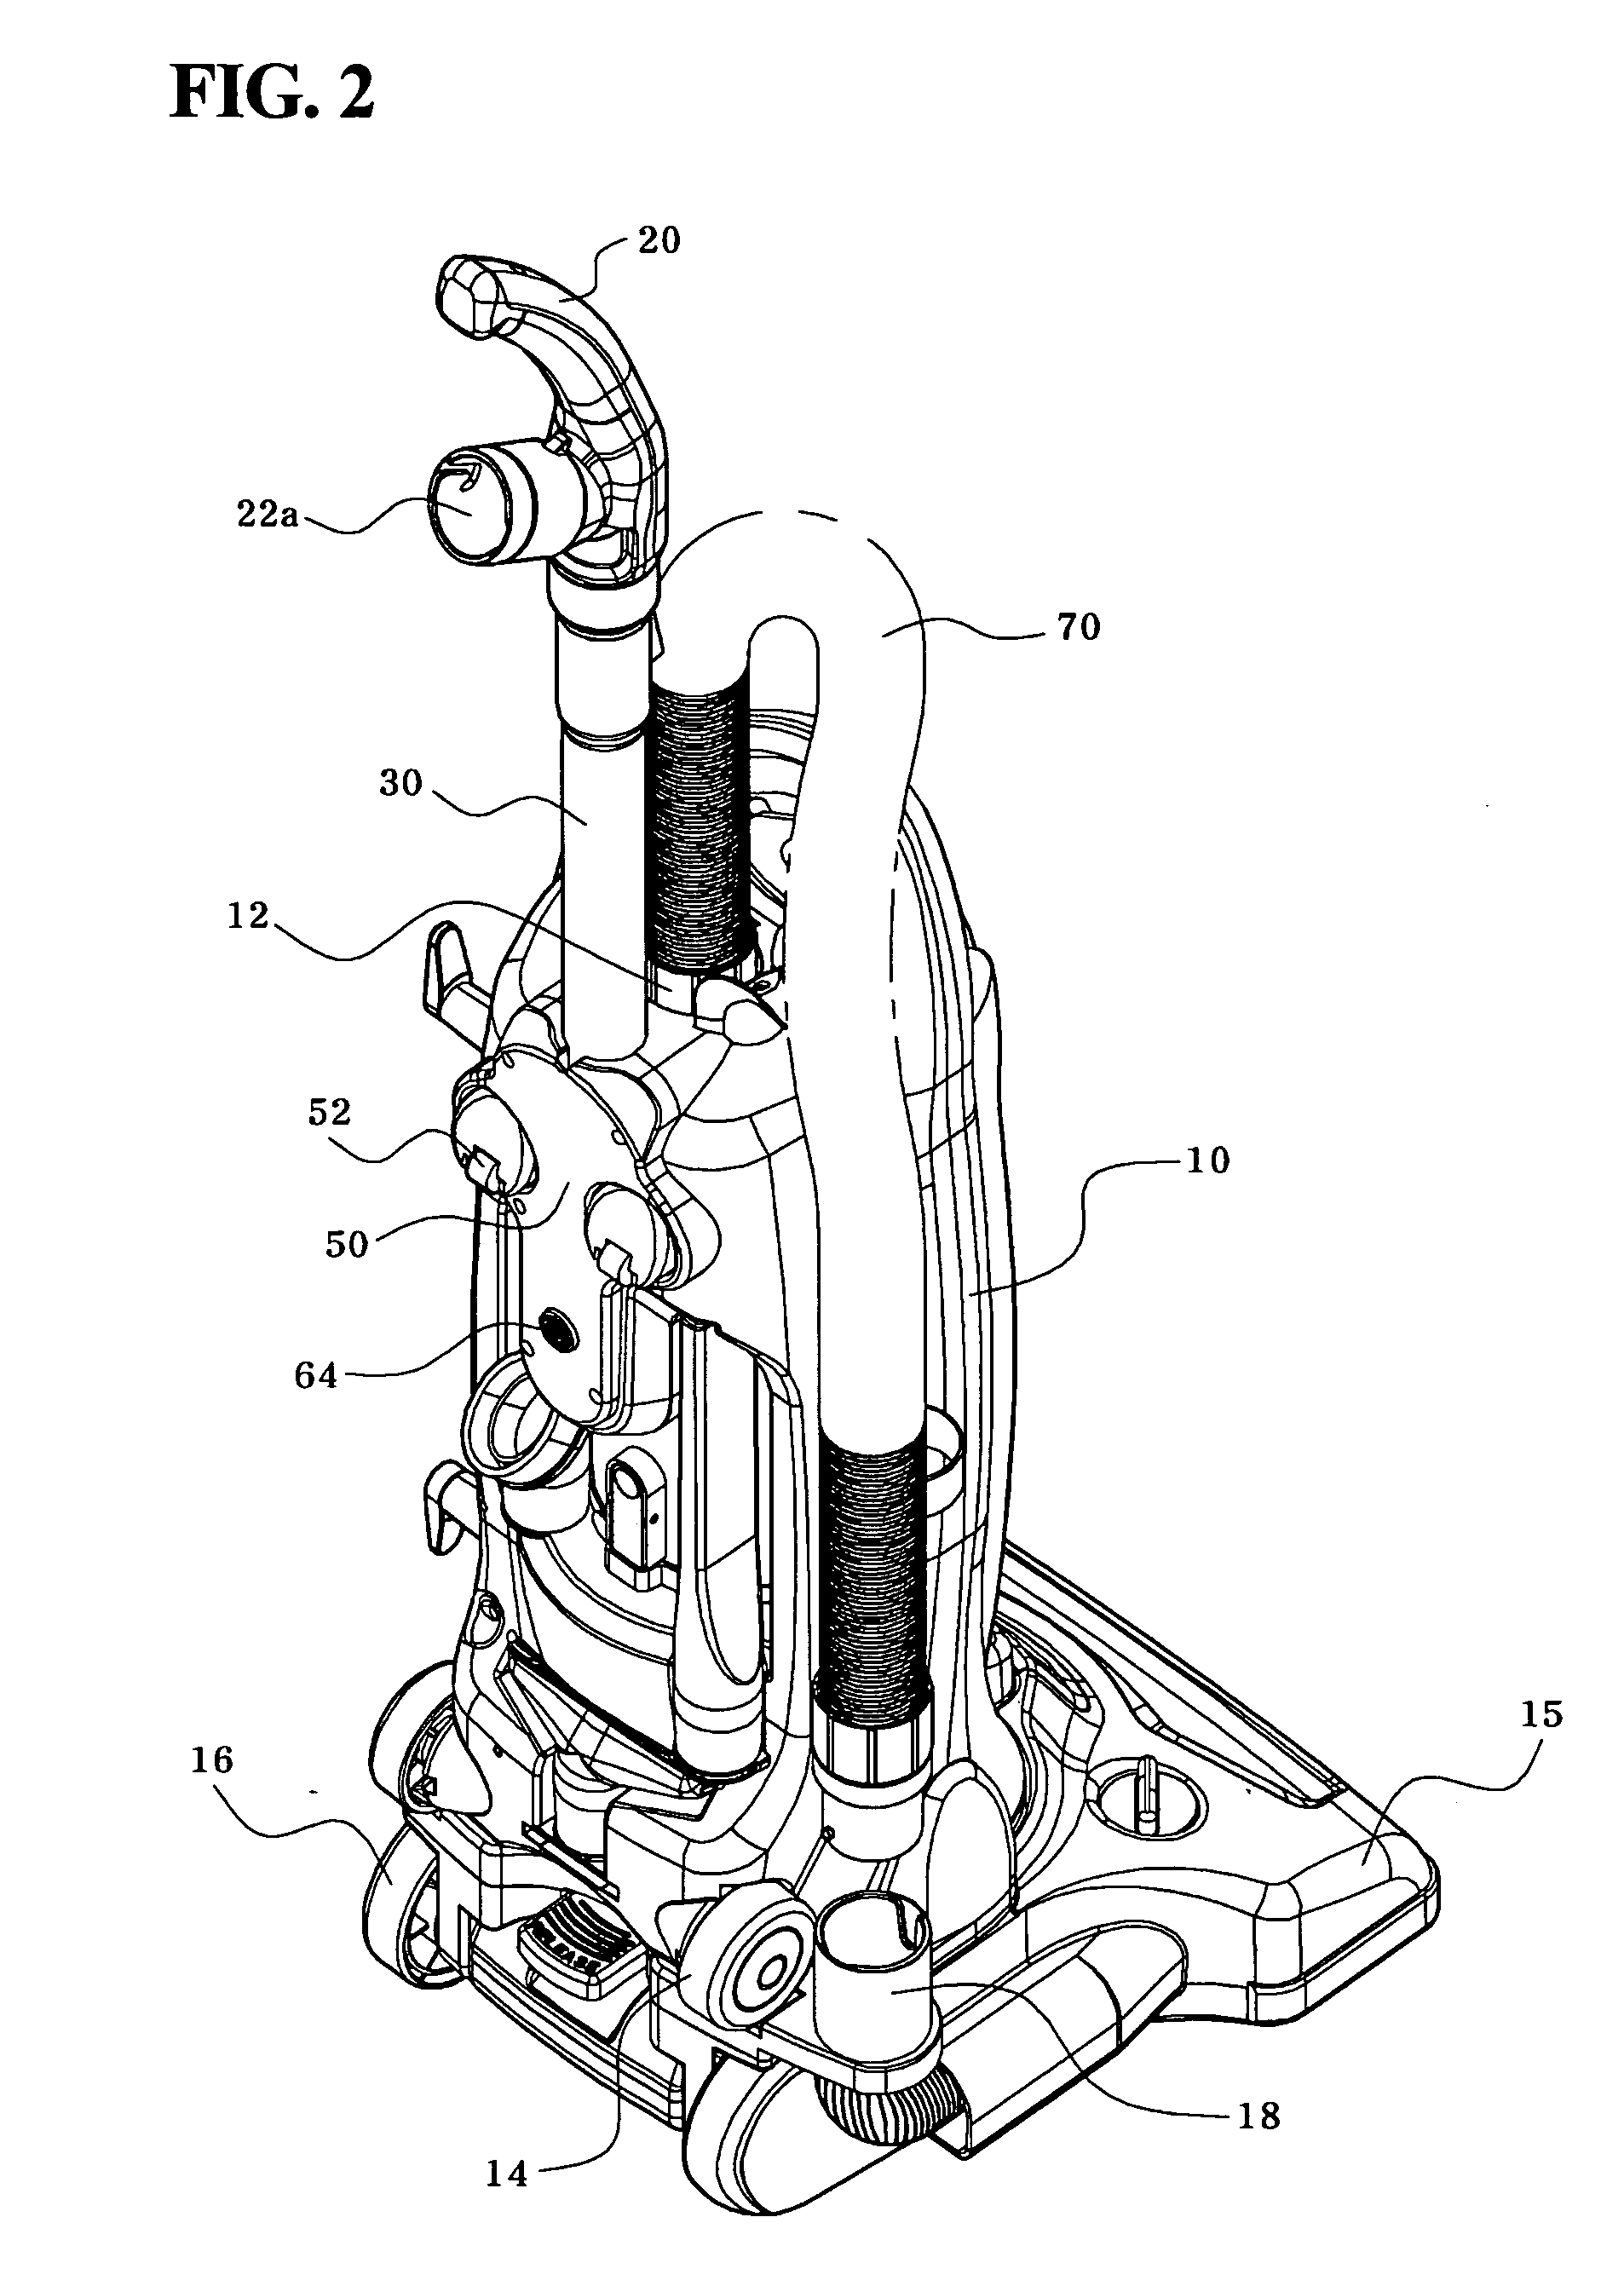 Upright type vacuum cleaner capable of being converted to canister type